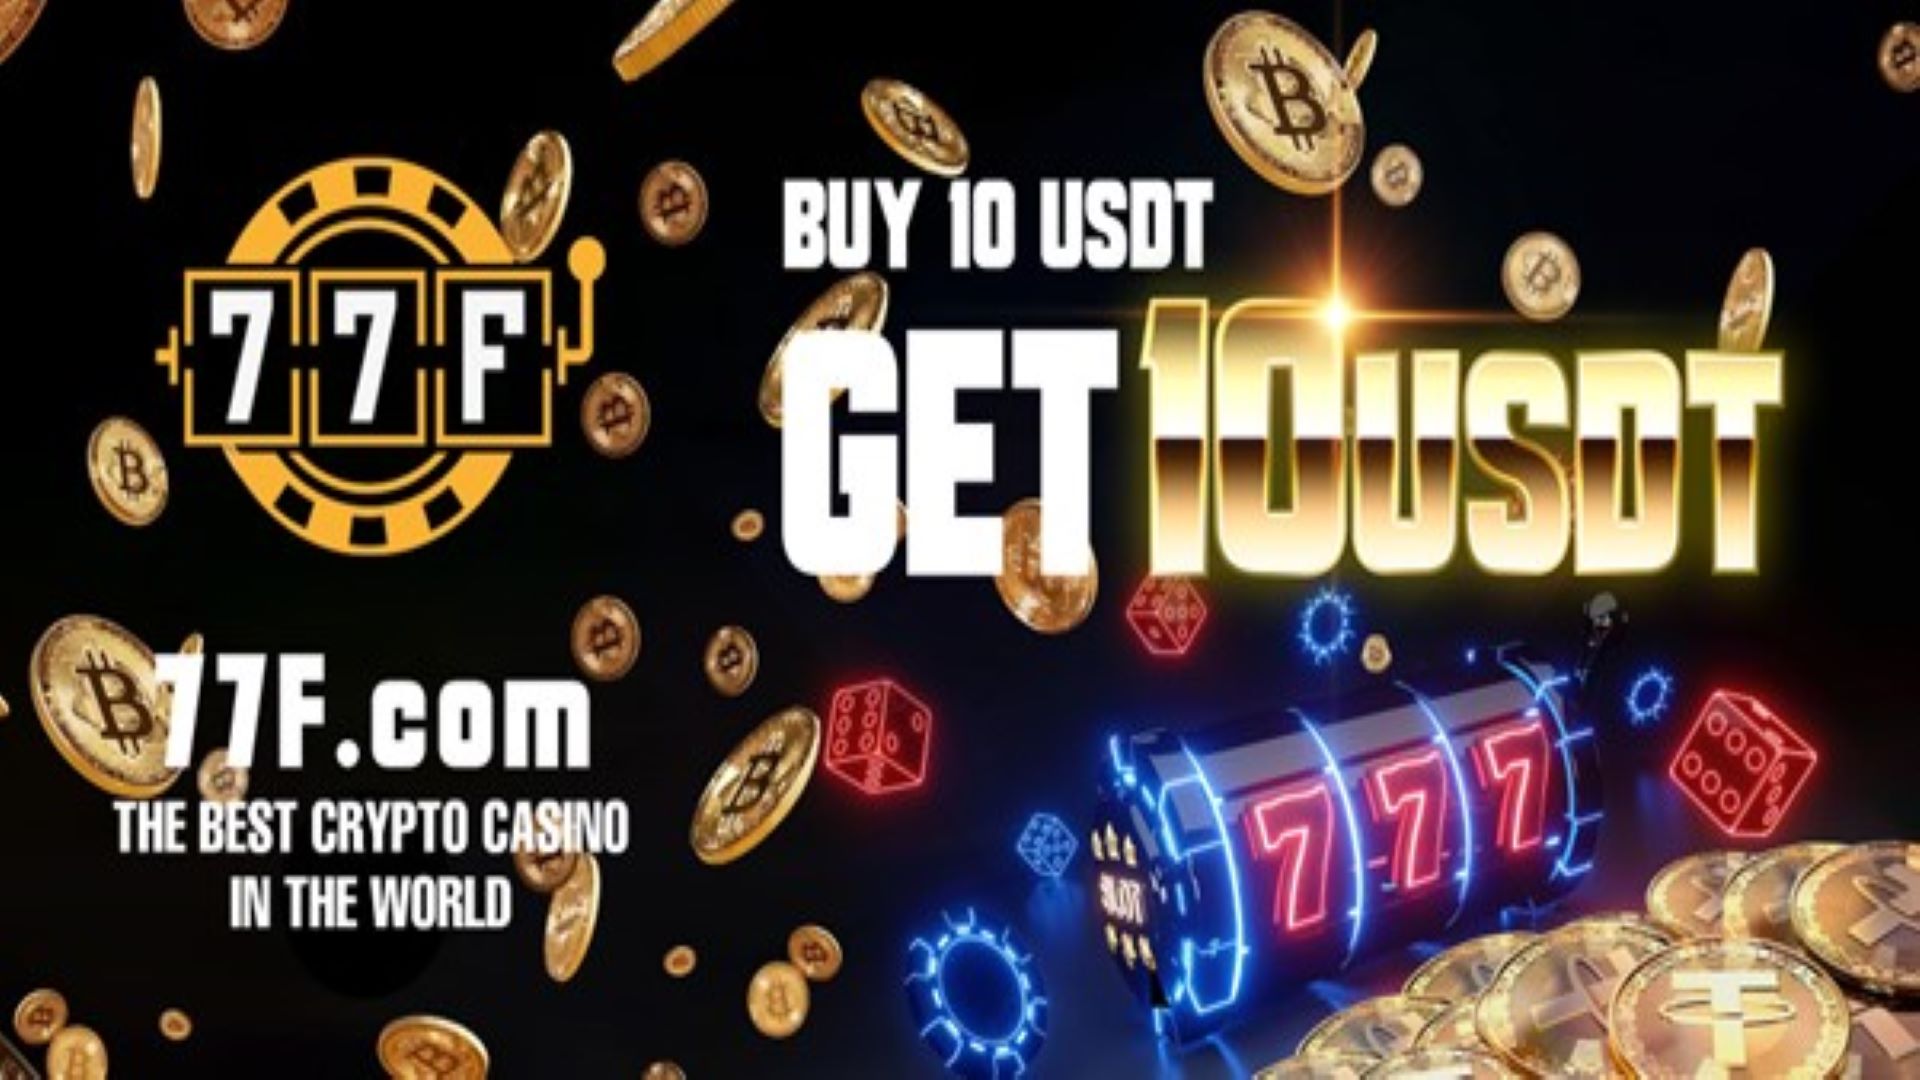 77f-brand-new-crypto-casino-with-the-highest-rebate-ever-the-coin